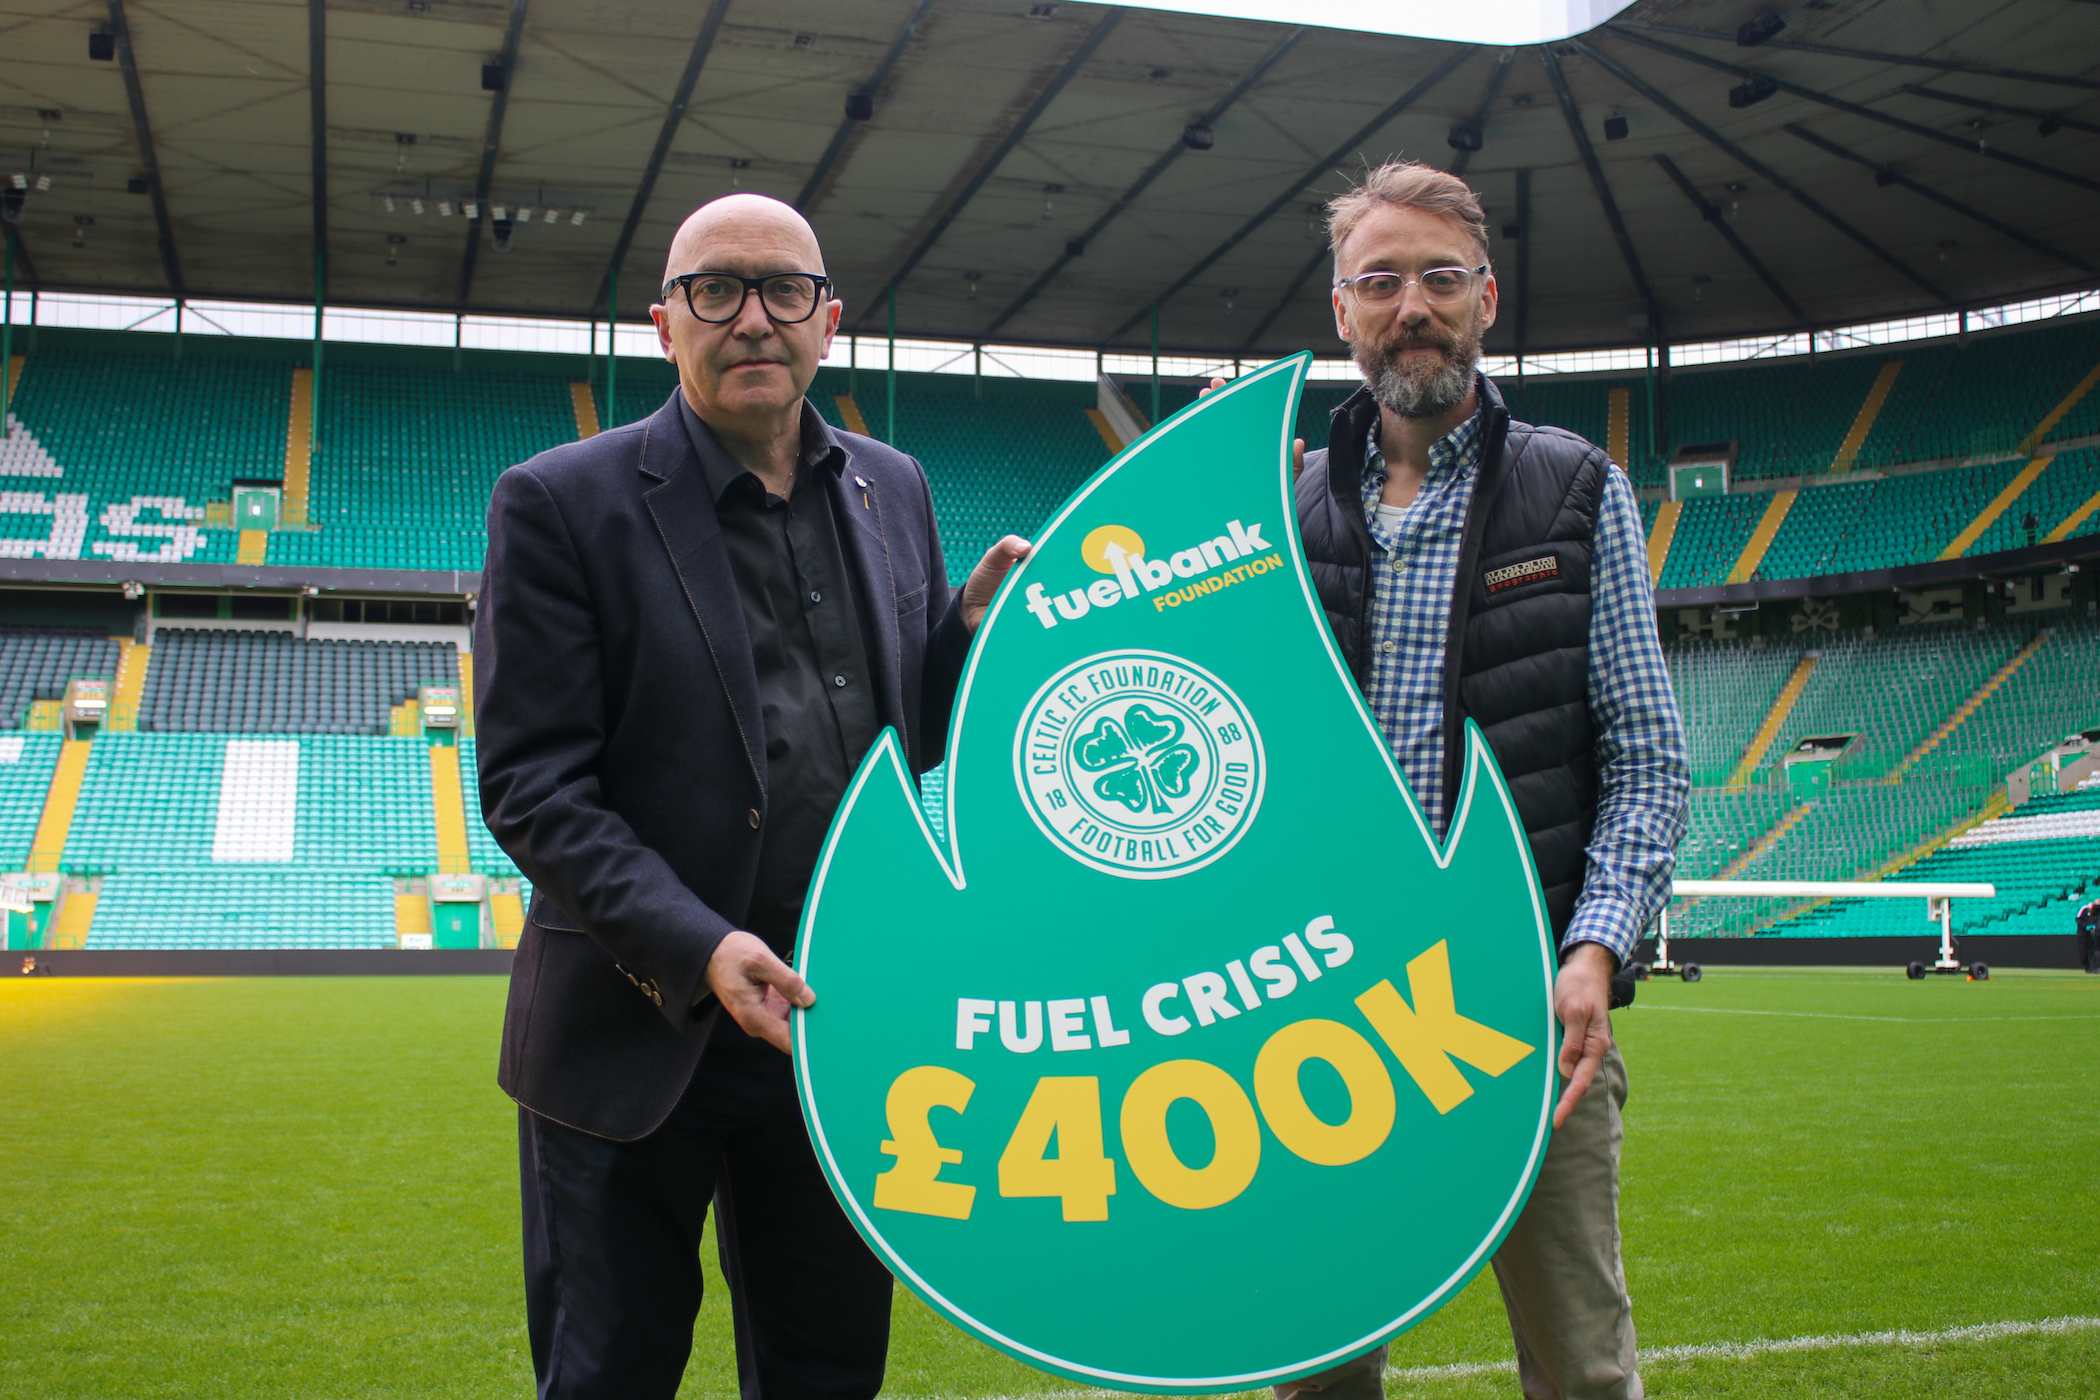 Celtic FC Foundation commit £400,000 to aid those in fuel crisis across Scotland Featured Image